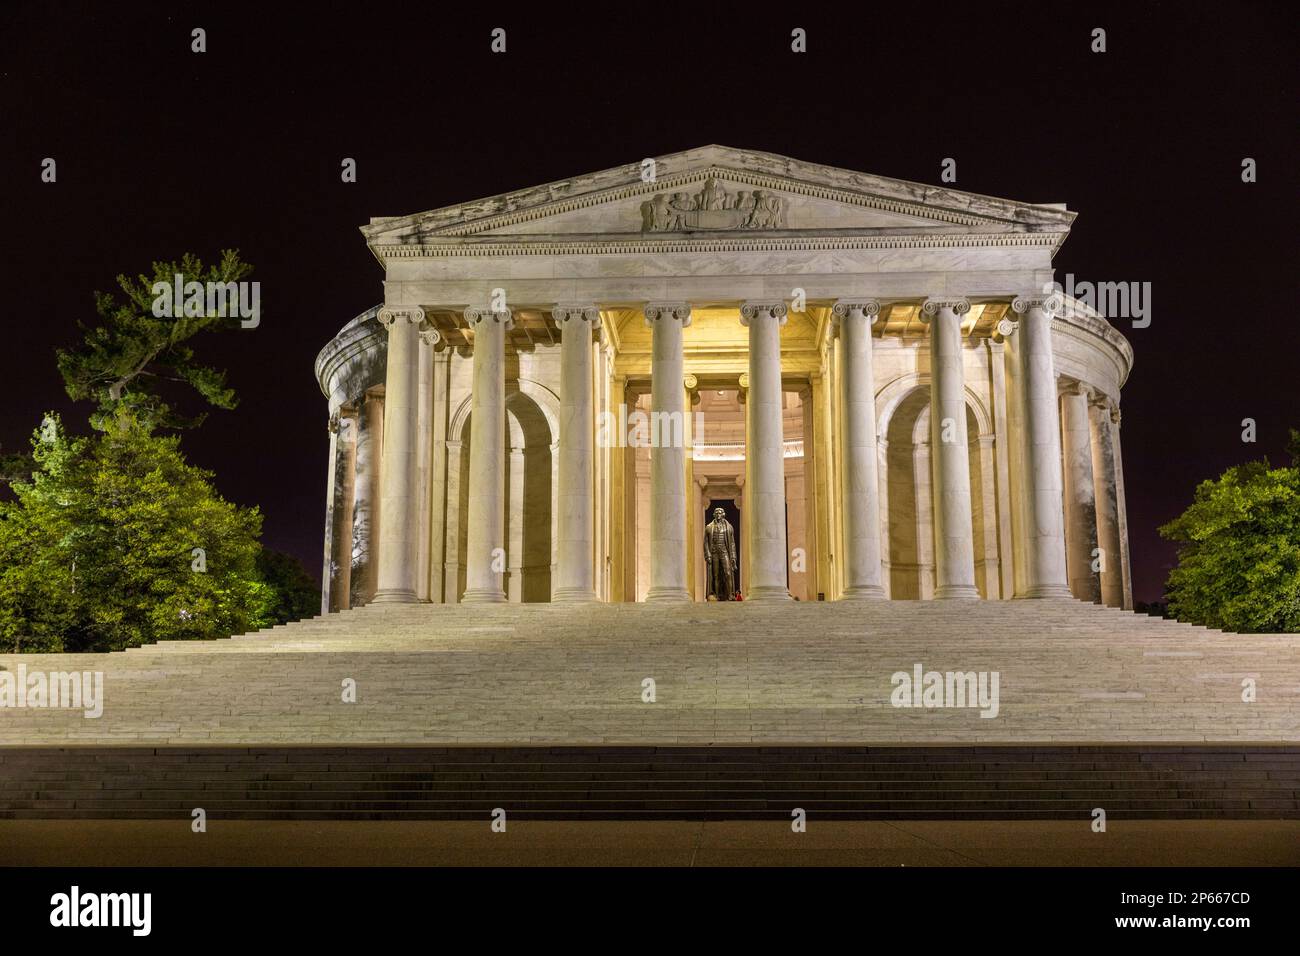 A night view of the Thomas Jefferson Memorial, lit up at night in West Potomac Park, Washington, D.C., United States of America, North America Stock Photo